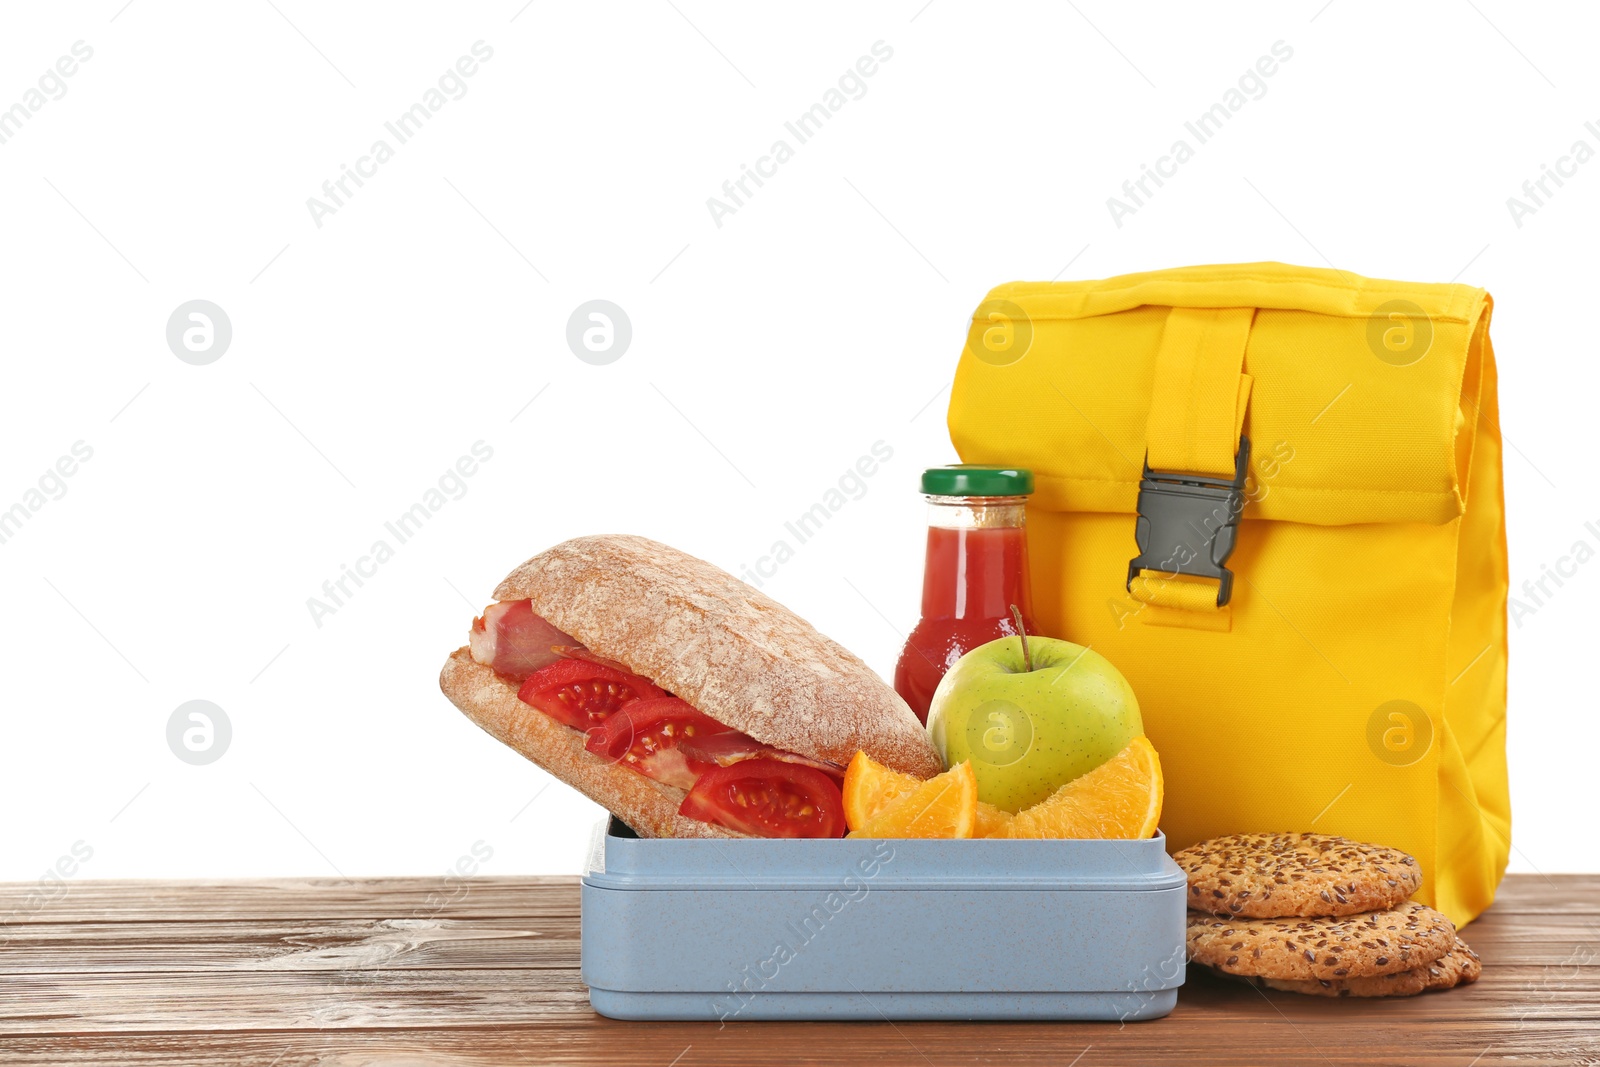 Photo of Lunch box with appetizing food and bag on table against white background